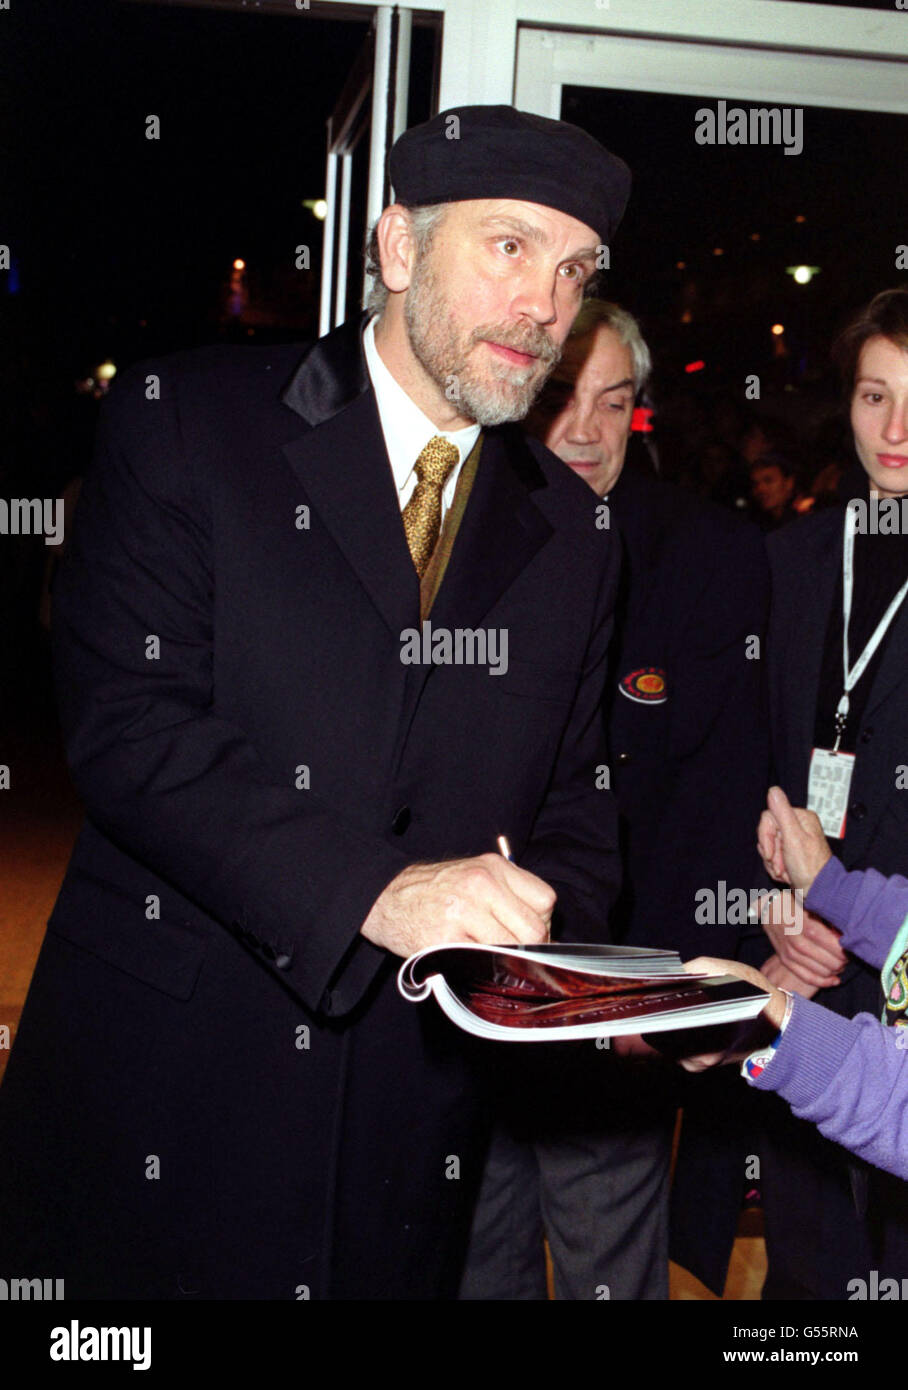 Actor John Malkovich, one of the stars of 'Shadow of the Vampire', signs autographs upon arrival for the film's premiere, which is part of the London Film Festival, at the Odeon West End cinema. Stock Photo